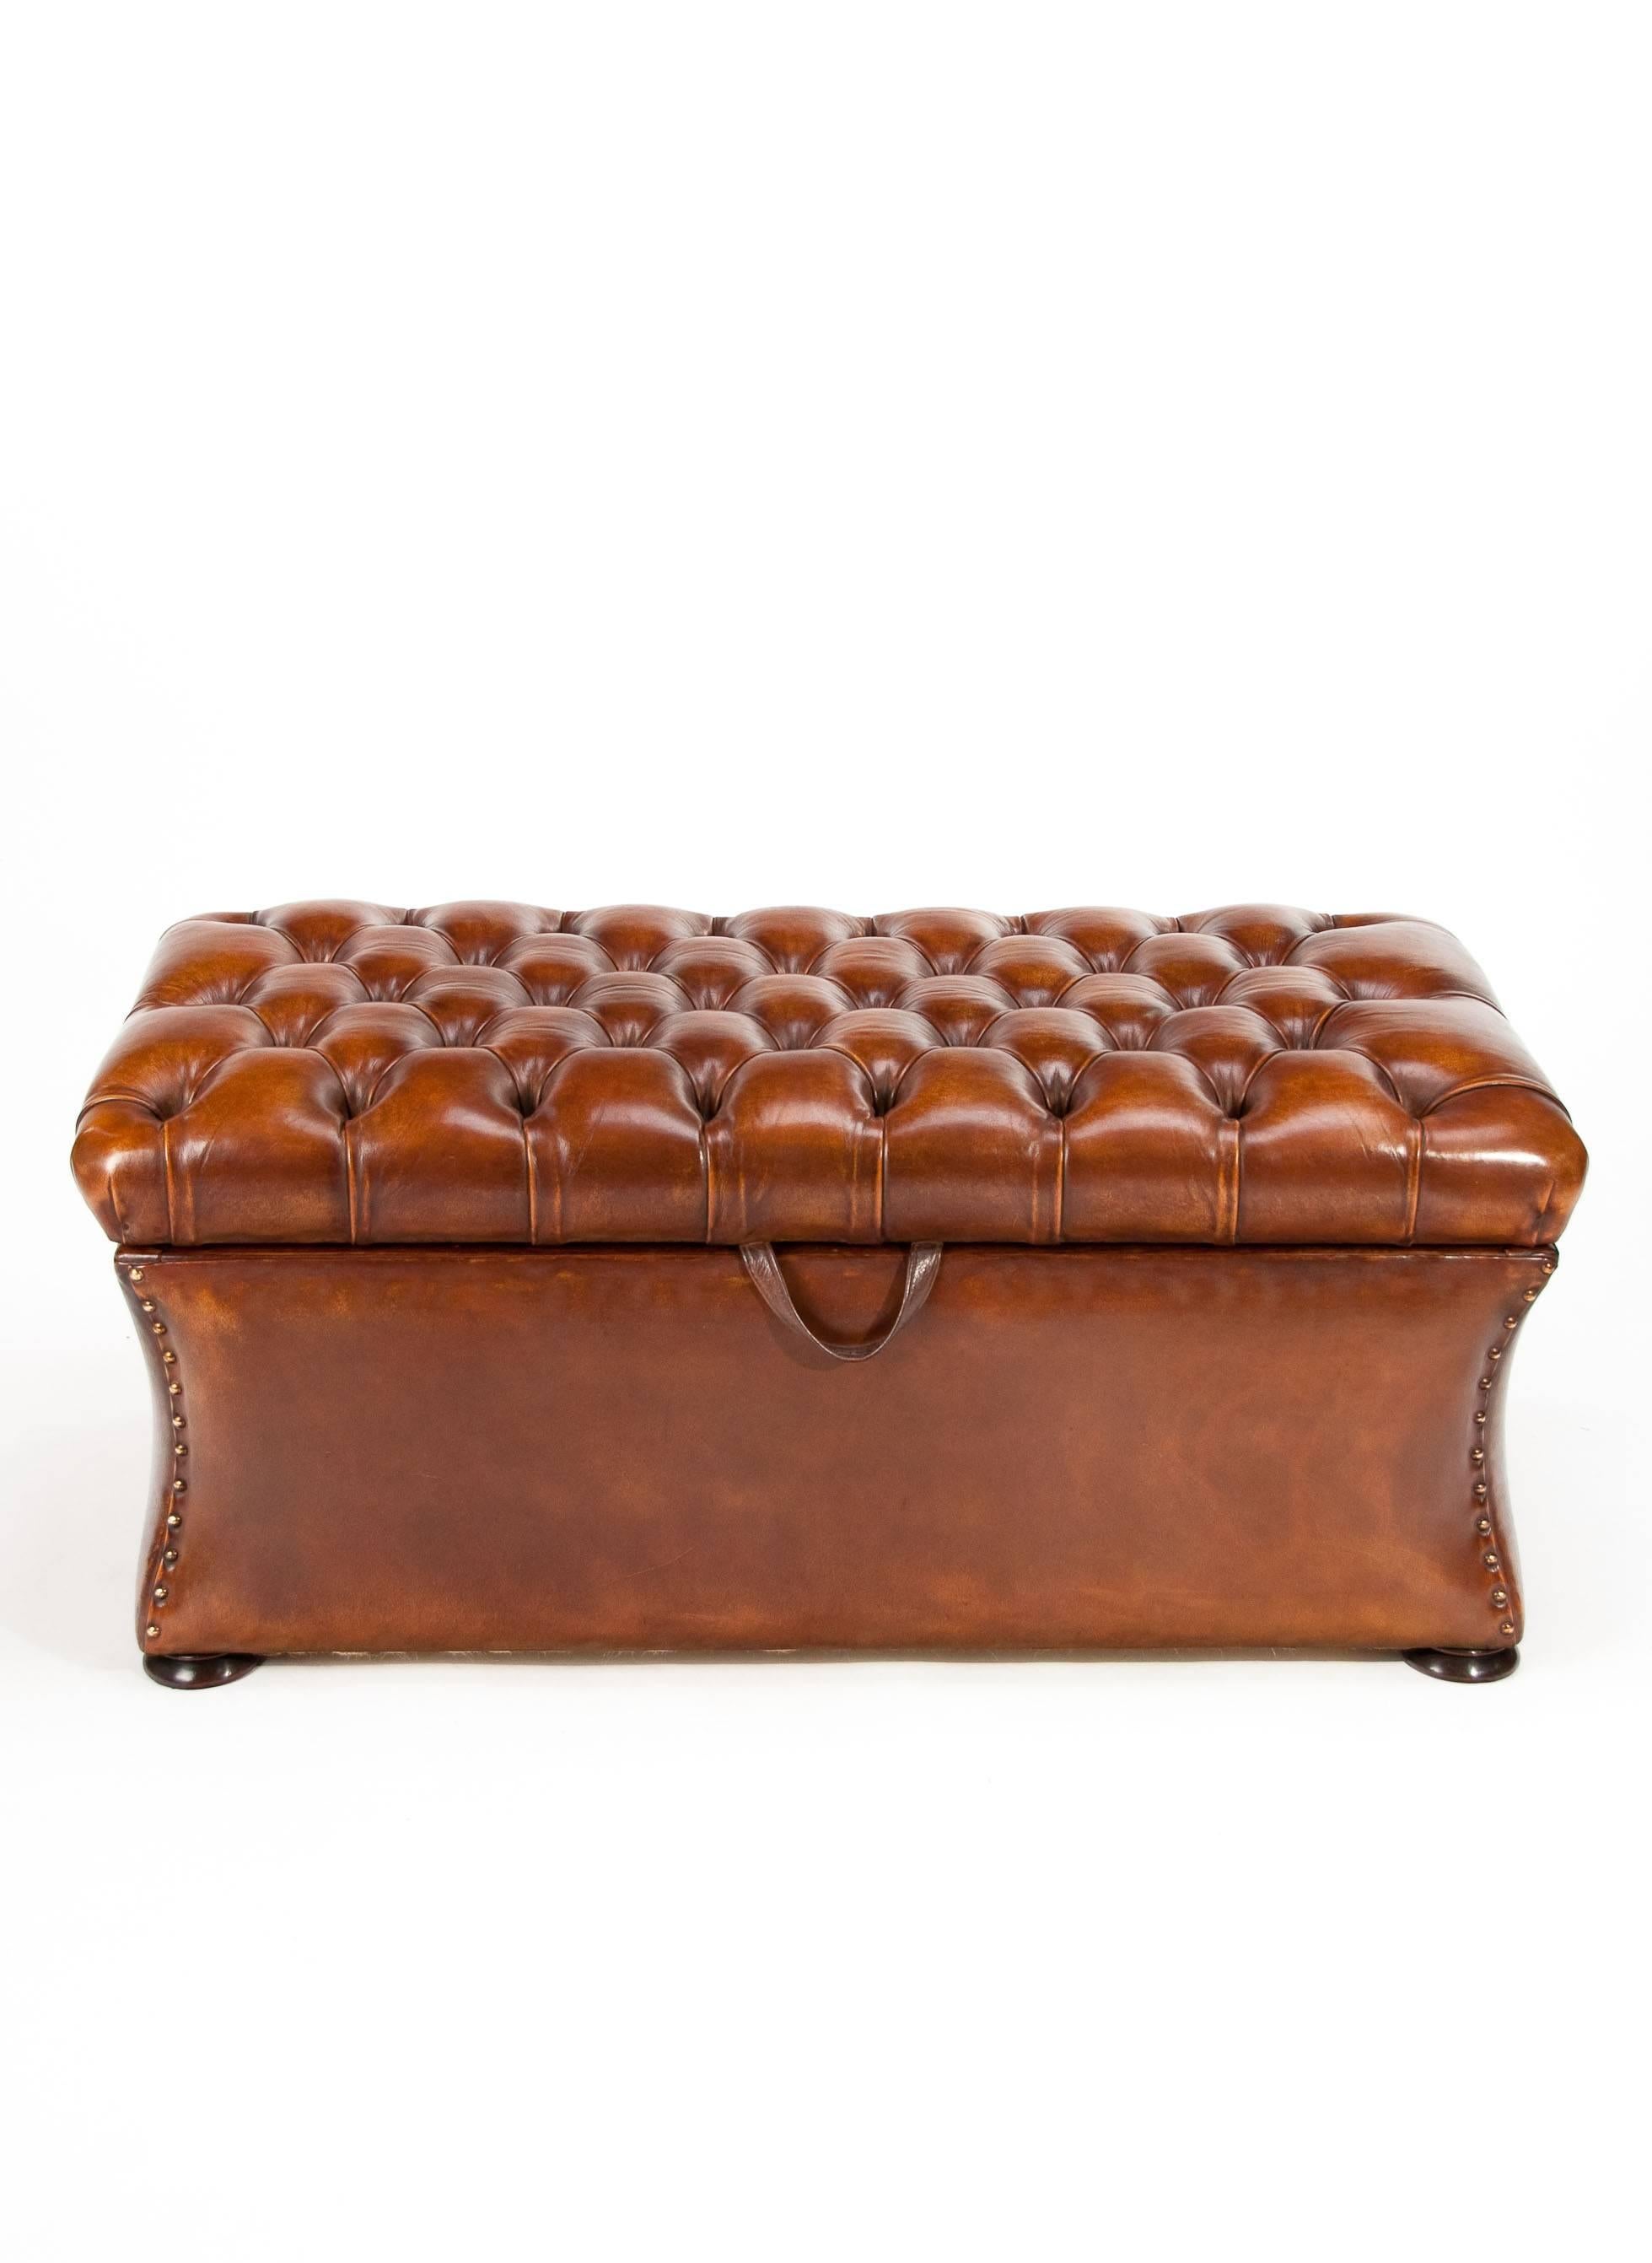 Quality 19th Century Shaped Leather Ottoman 2